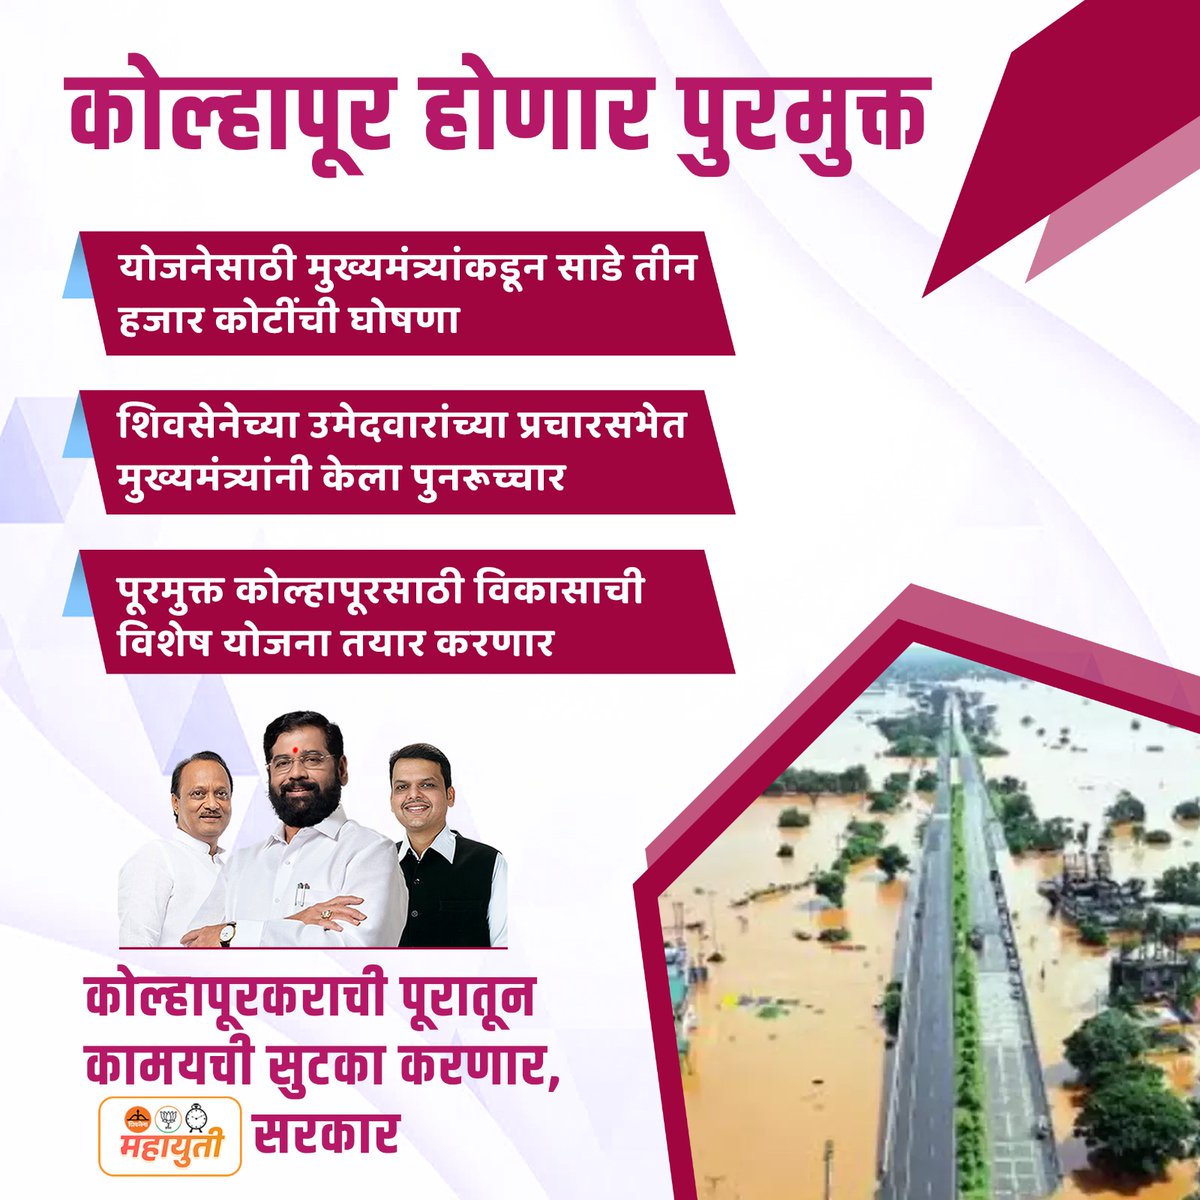 In a significant move, CM Eknath Shinde announced a special development plan for Kolhapur to ensure it's flood-free. This demonstrates the government's commitment to addressing pressing issues and securing the future of the city.